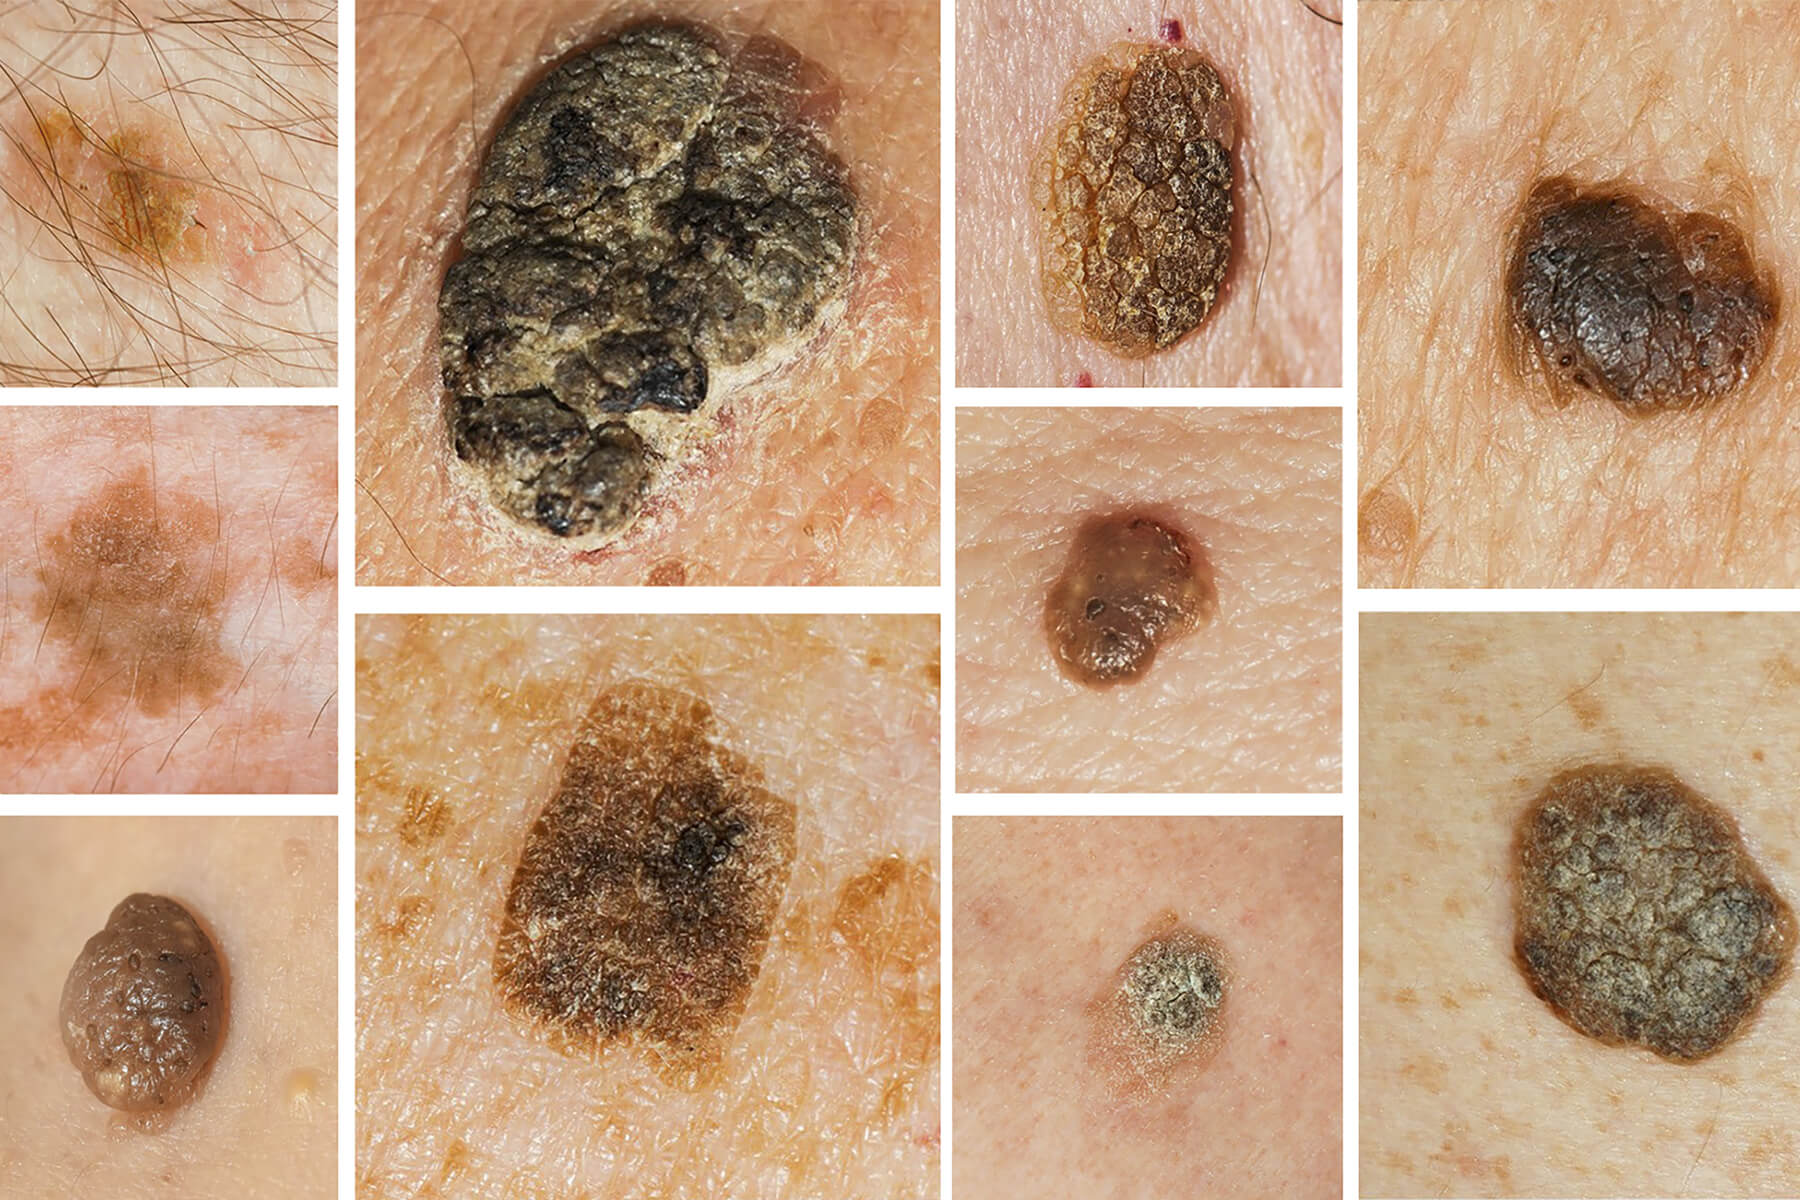 Seborrheic Keratosis Removal Treatment in Laval and Greater Montreal Area – Causes, Risks and Painless Treatments - CO2 Laser Treatment at LABELLE Clinic - honest testimony - Seborrheic Keratosis With Cryotherapy